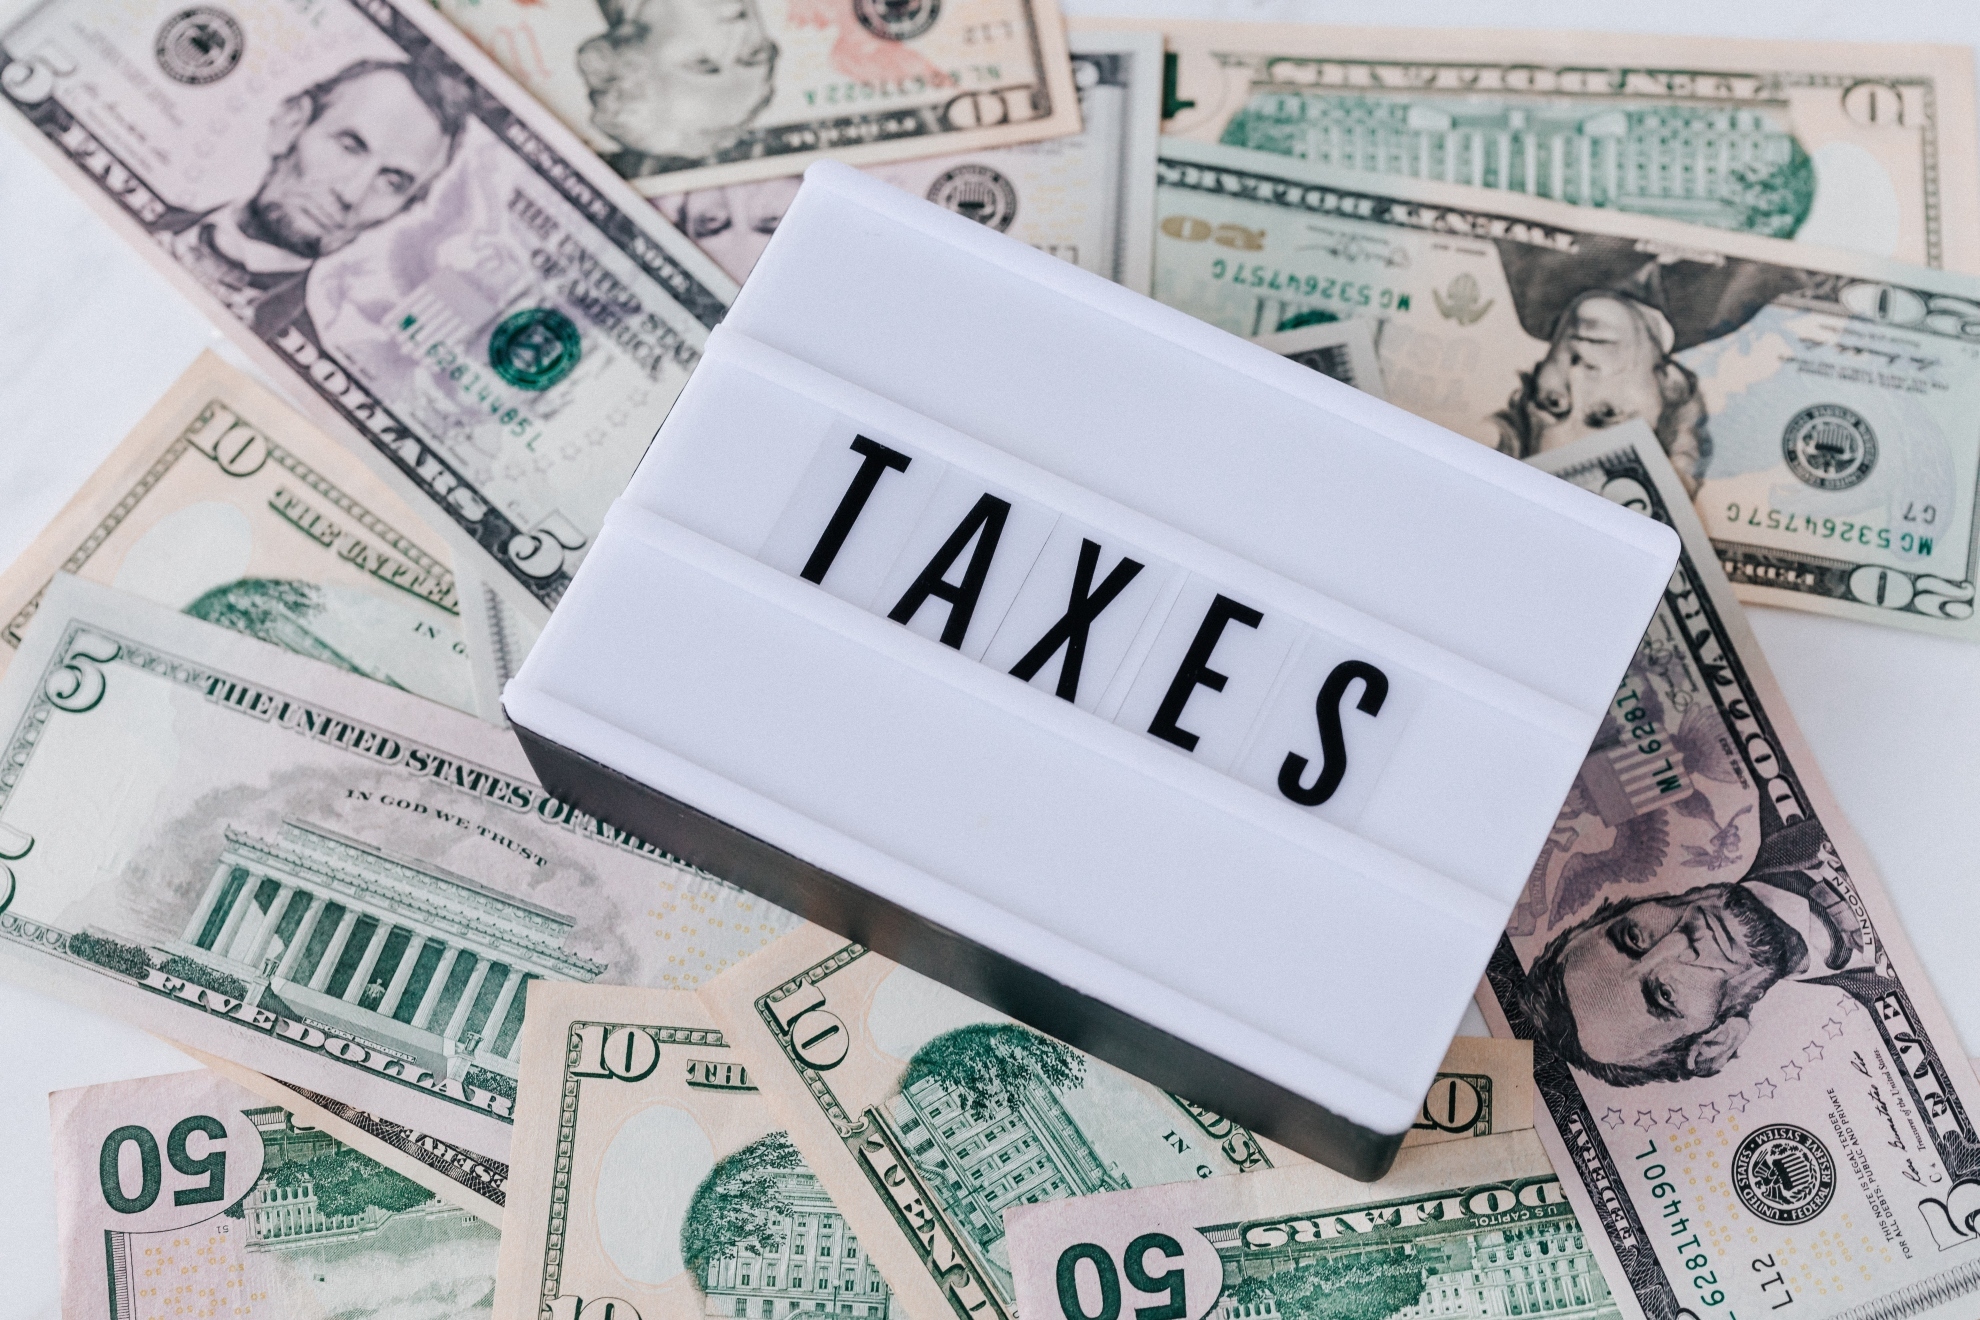 2023 Quarterly Tax Season Dates Revealed - Don't Miss Your Payments!